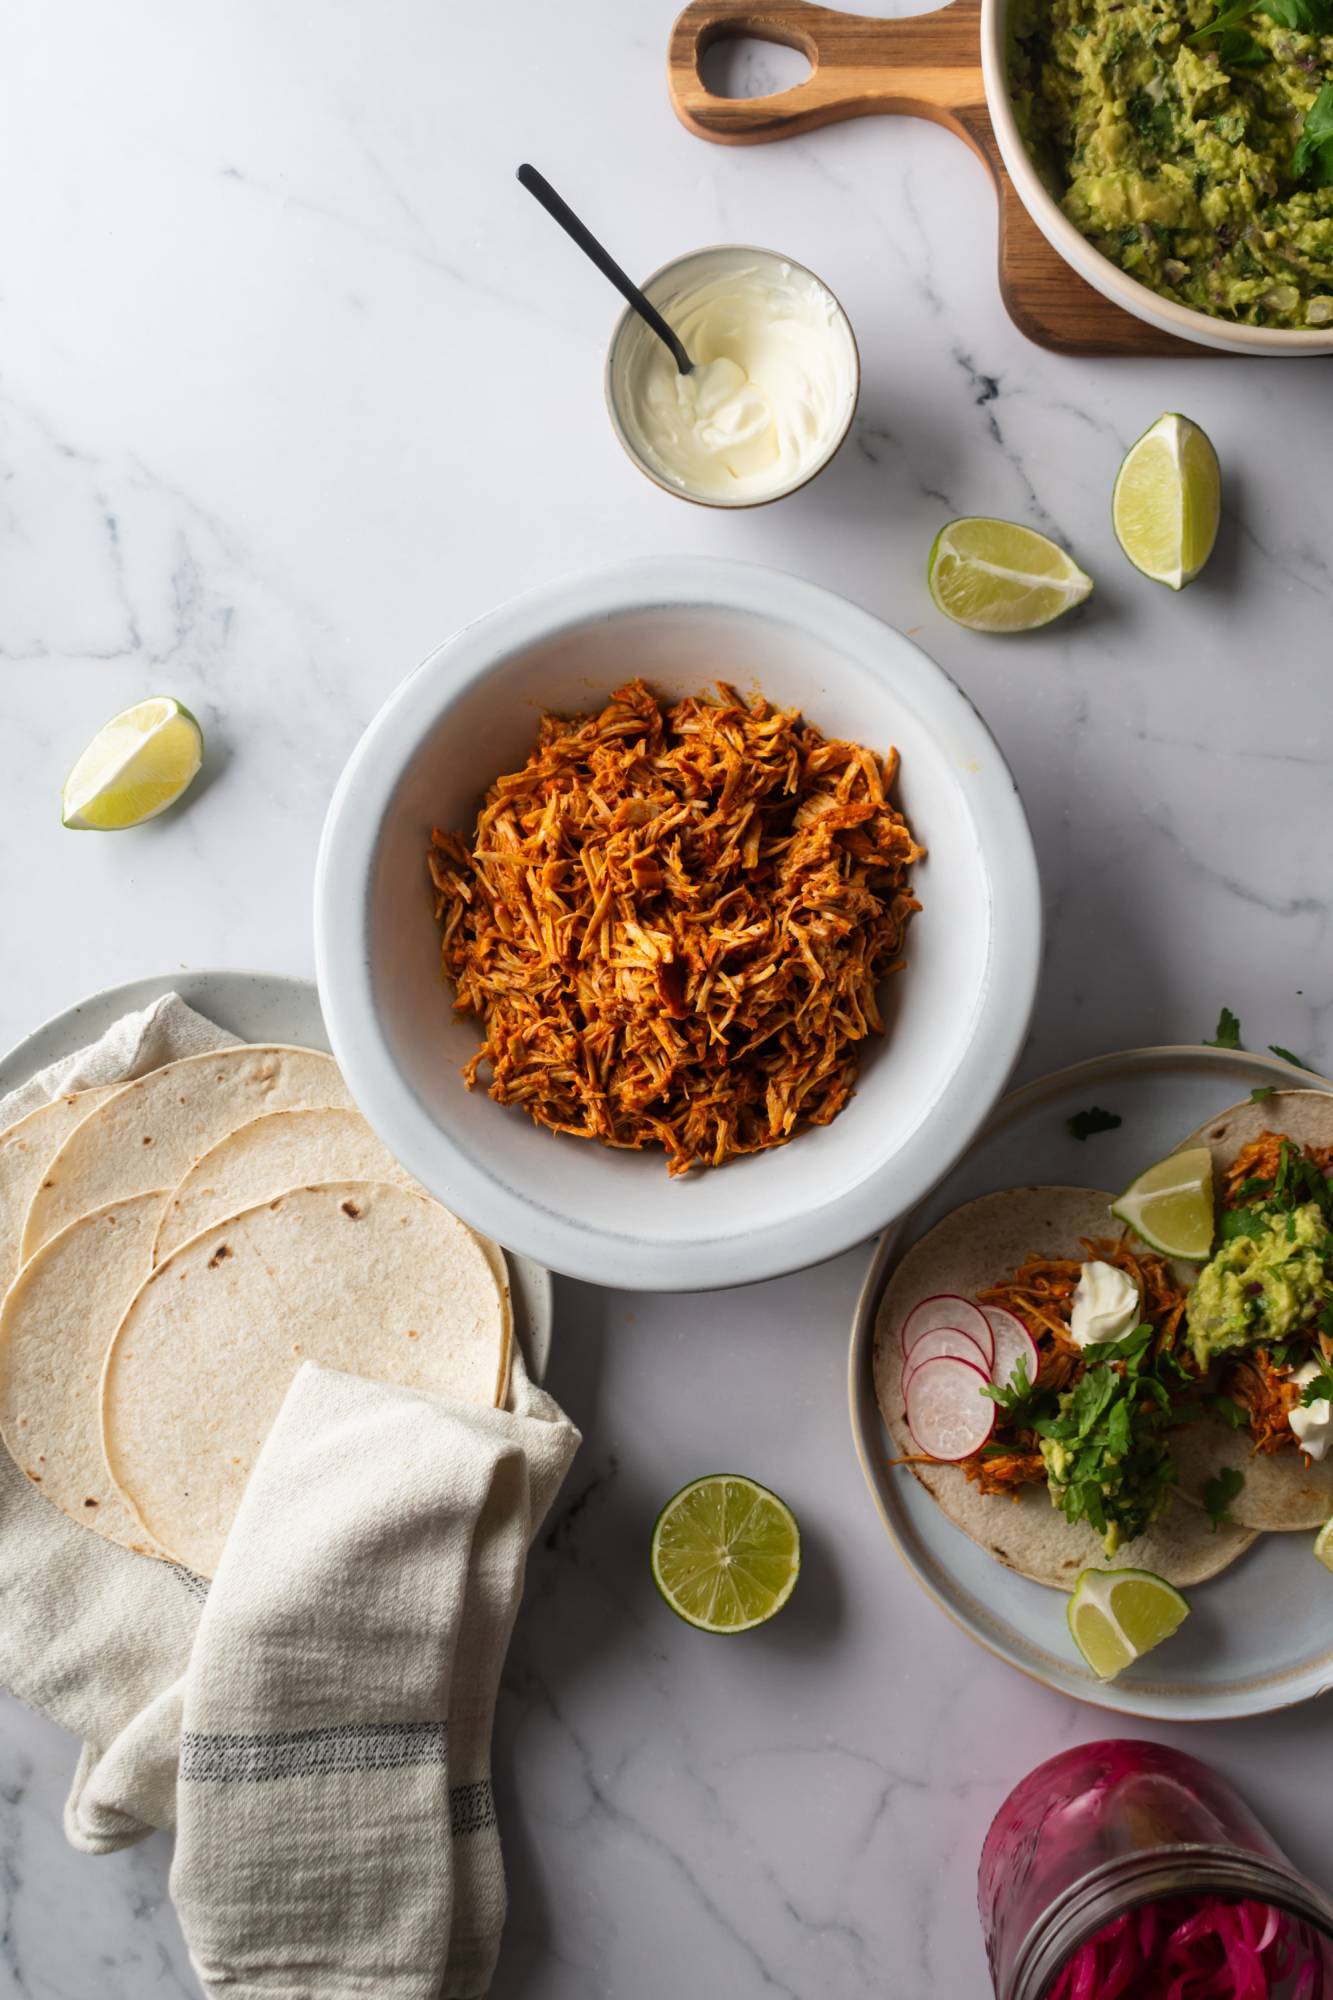 Mexican cochinita pibil shredded in a bowl with tacos and guacamole on the side.